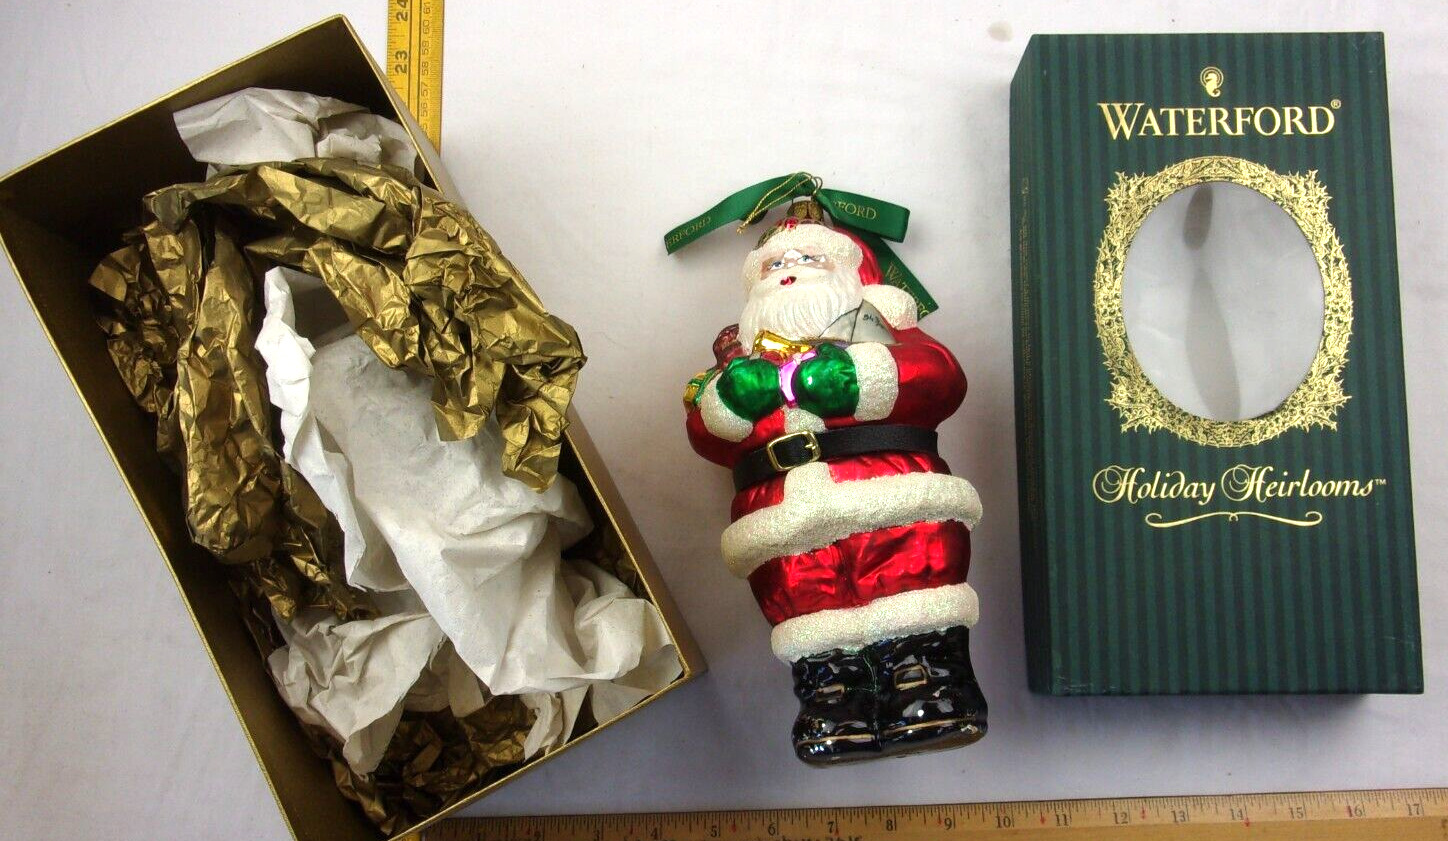 Santa Clause Waterford Holiday Heirloom 1998 Collectors Edition numbered